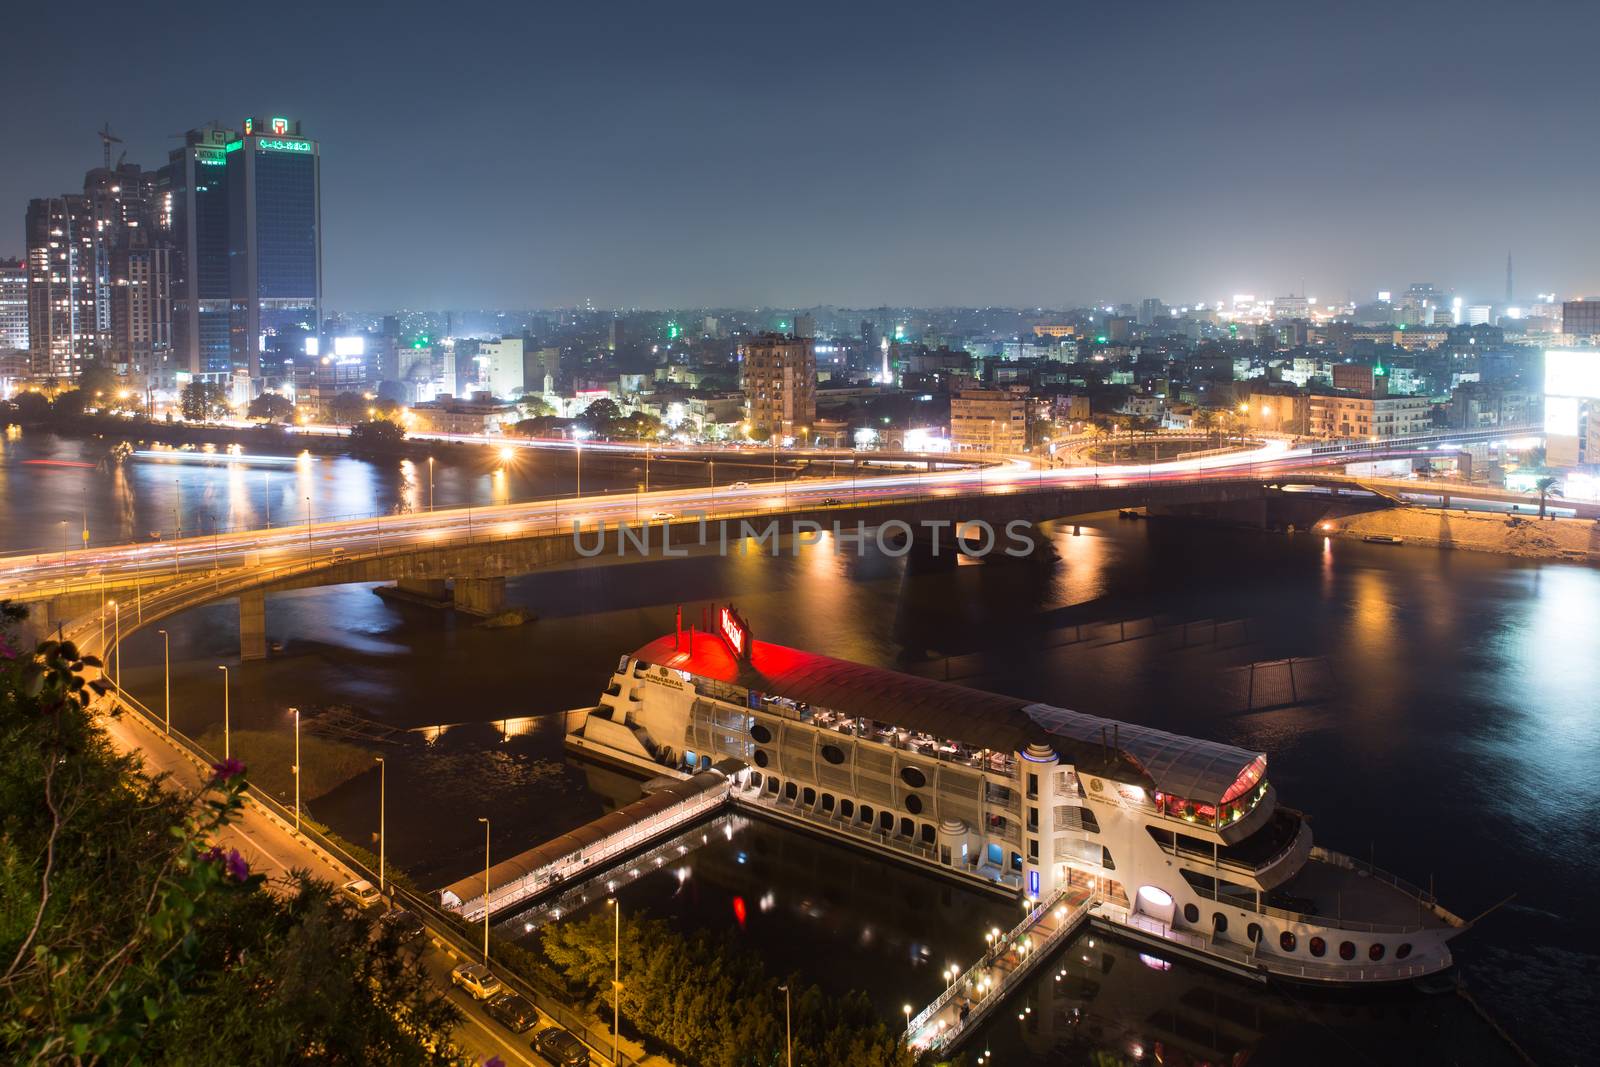 Cairo, Egypt - October 31, 2014: Traffic light trails in Cairo at night, the 15th May bridge, the Nile river and the Corniche Street.